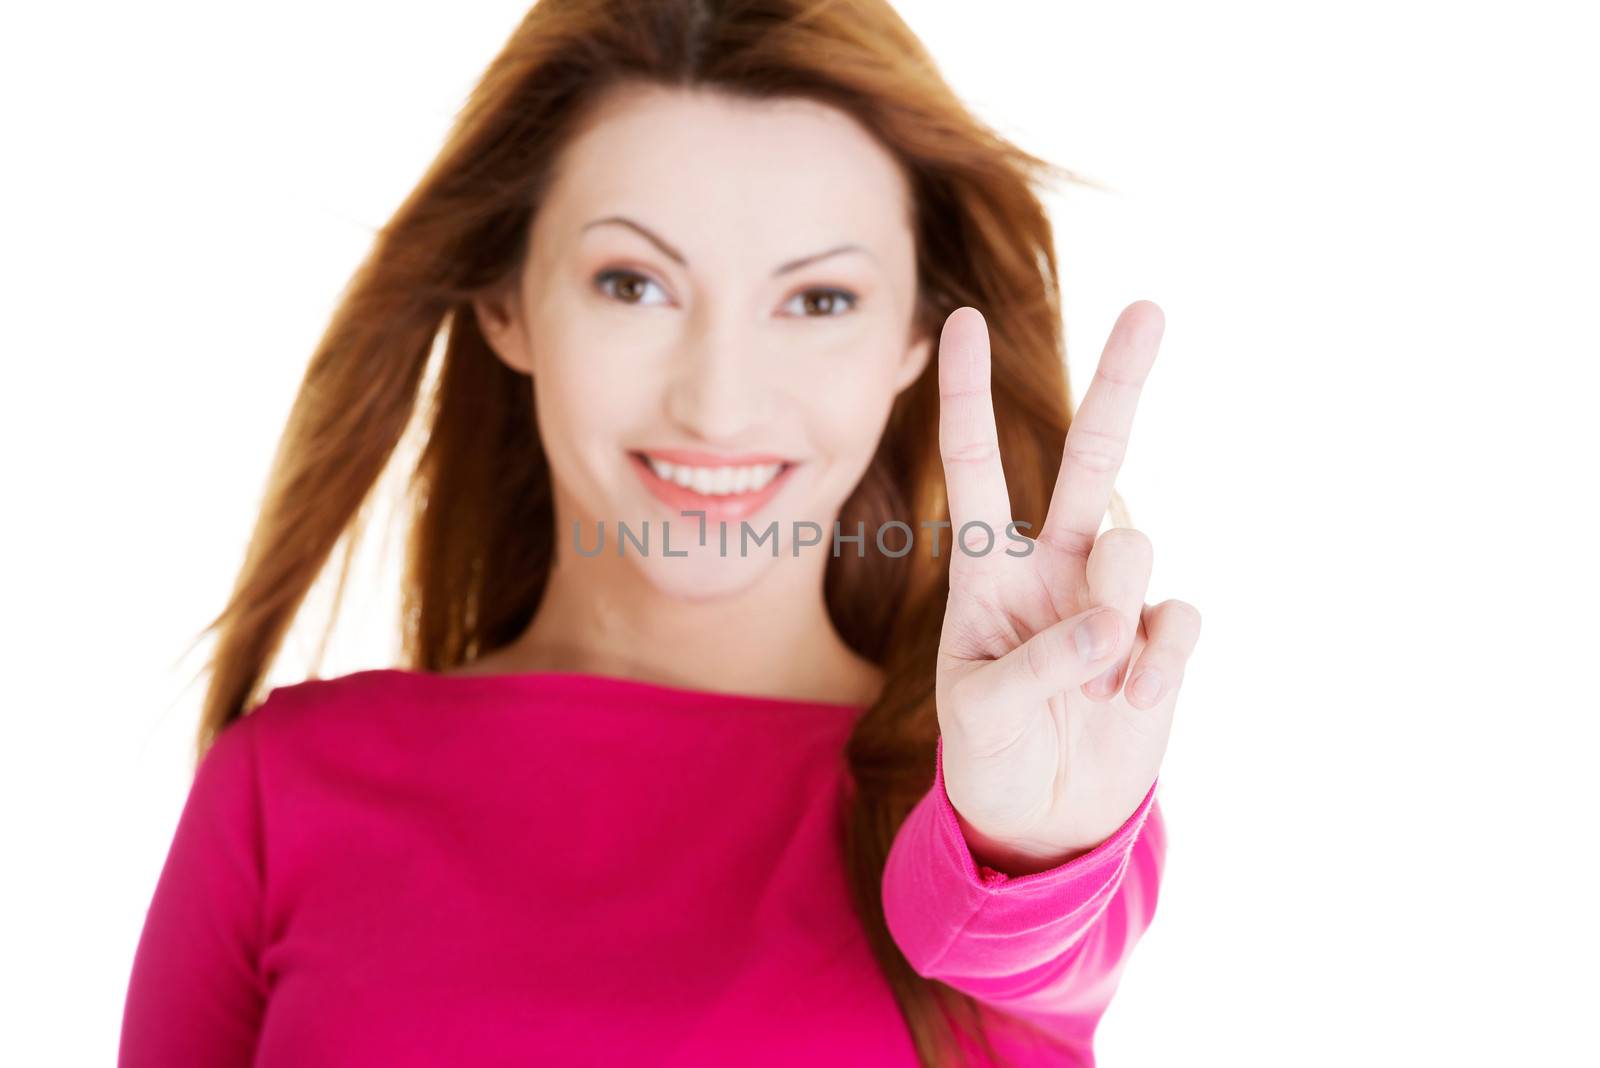 Happy woman showing victory sign